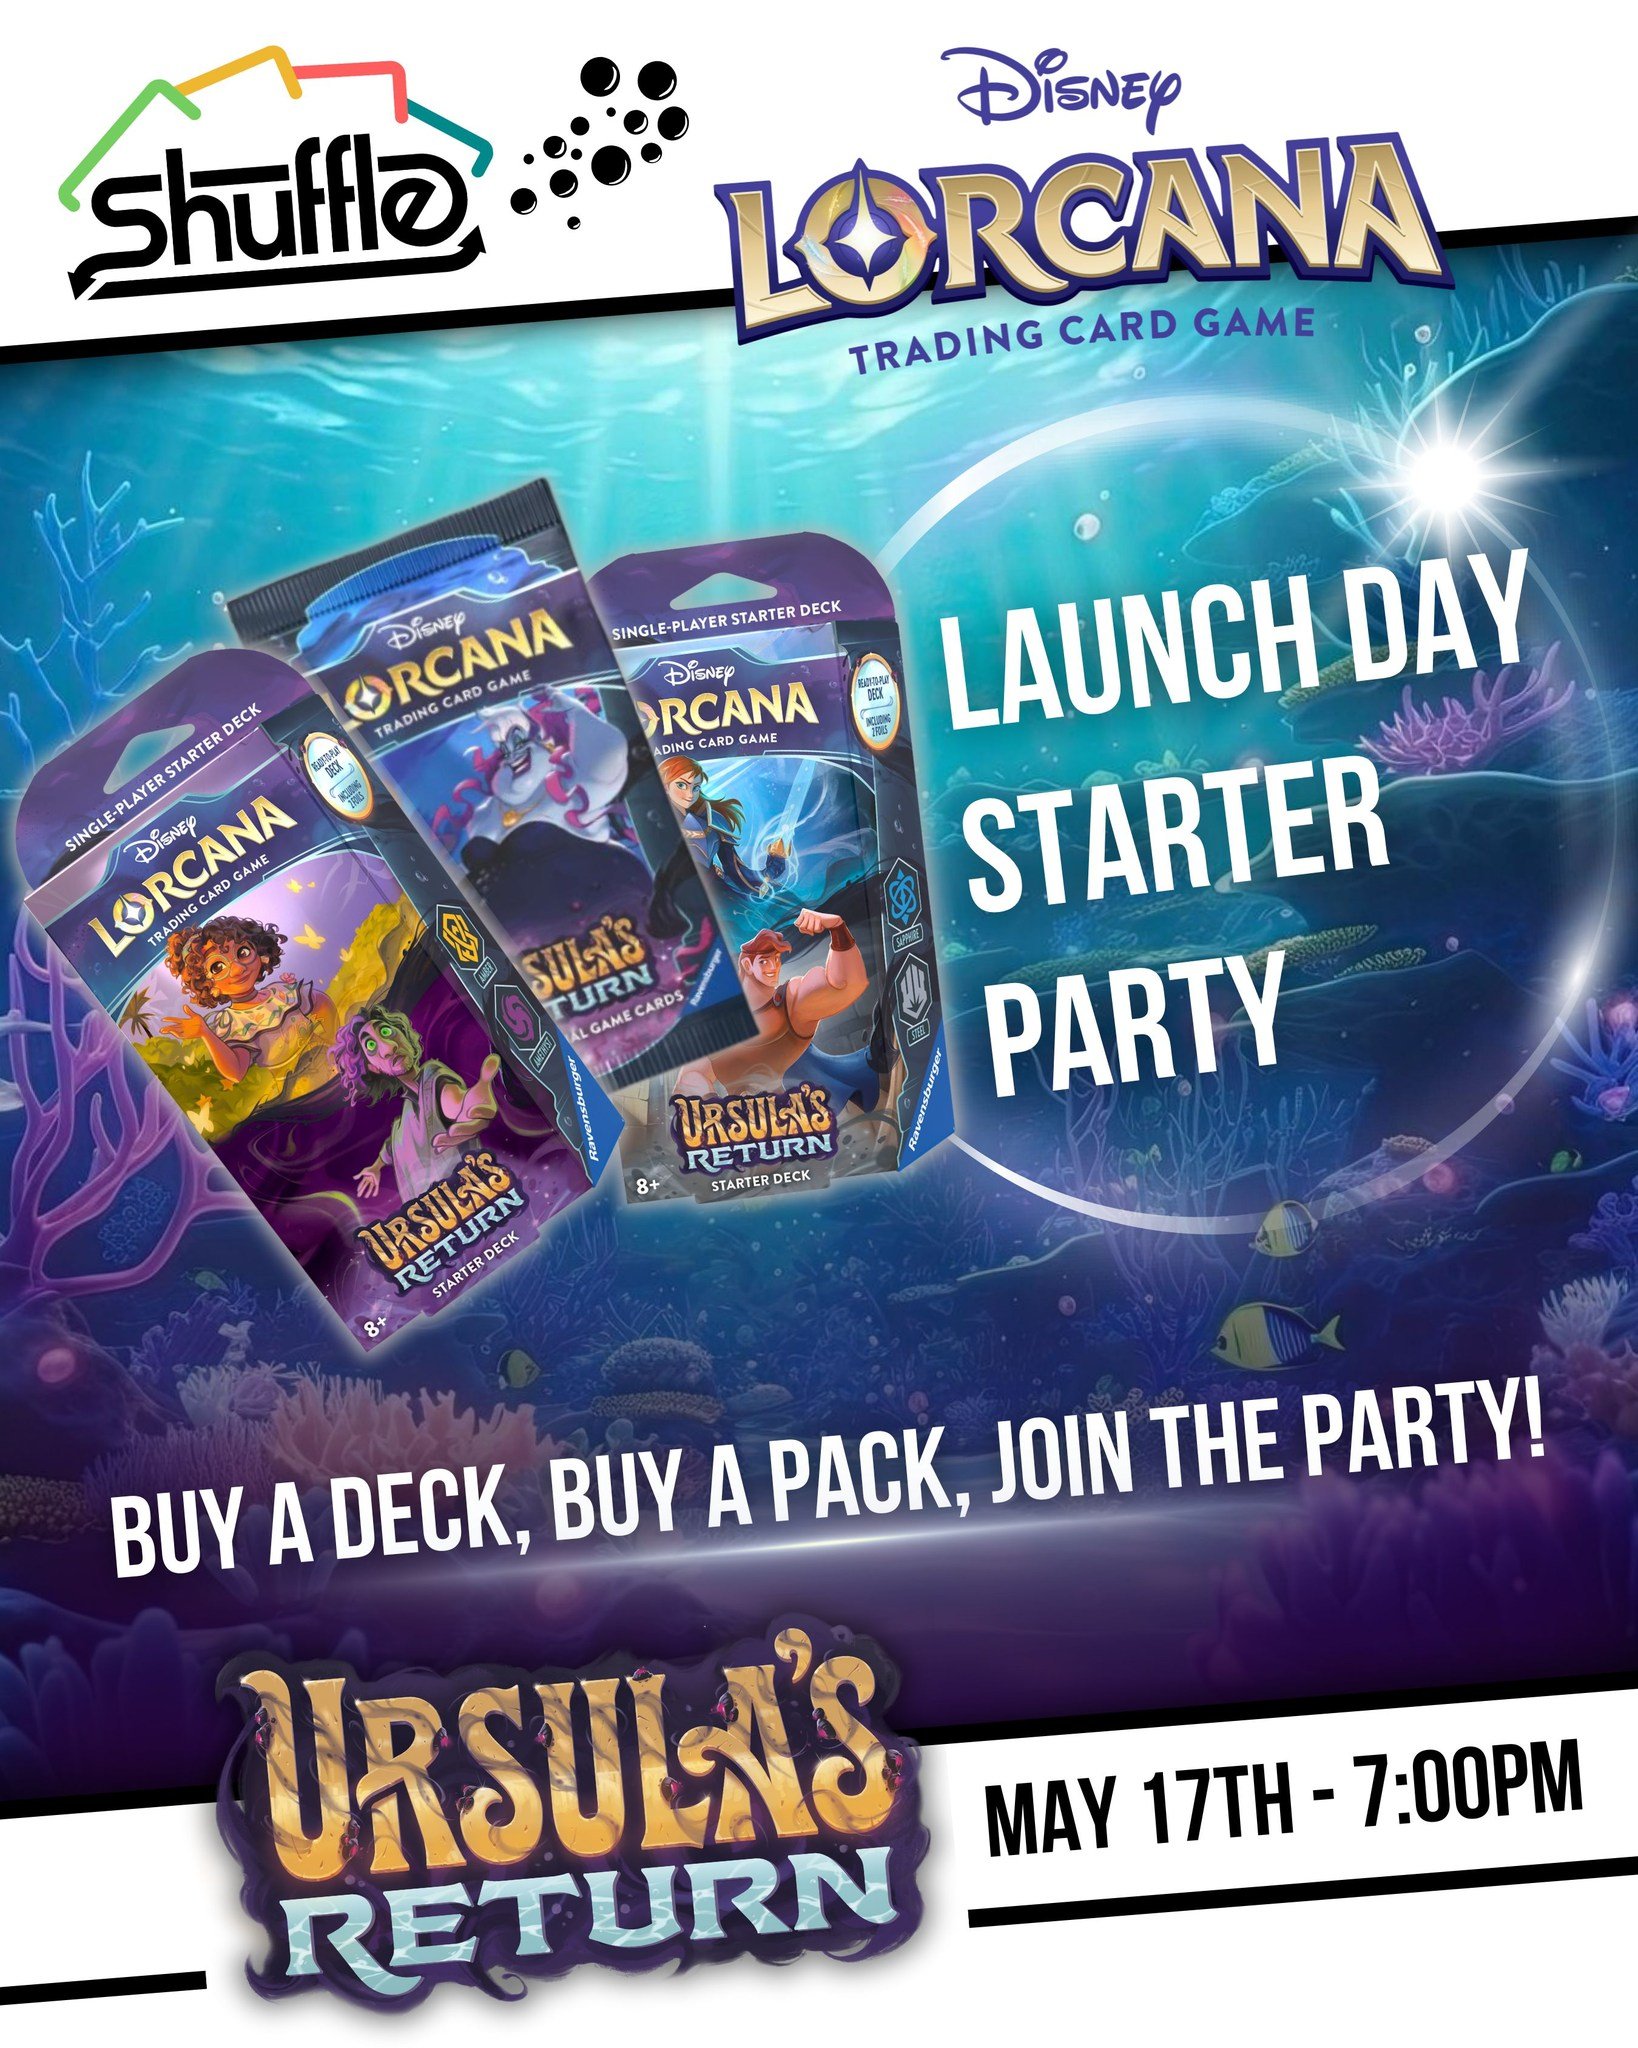 Ursula's Return is almost upon us, so it's time for a...

Lorcana Launch Day Starter Party!

On May 17th, we will be celebrating the new set with a Disney shindig! Come collect your new cards, modify a starter deck and play some organised matches for